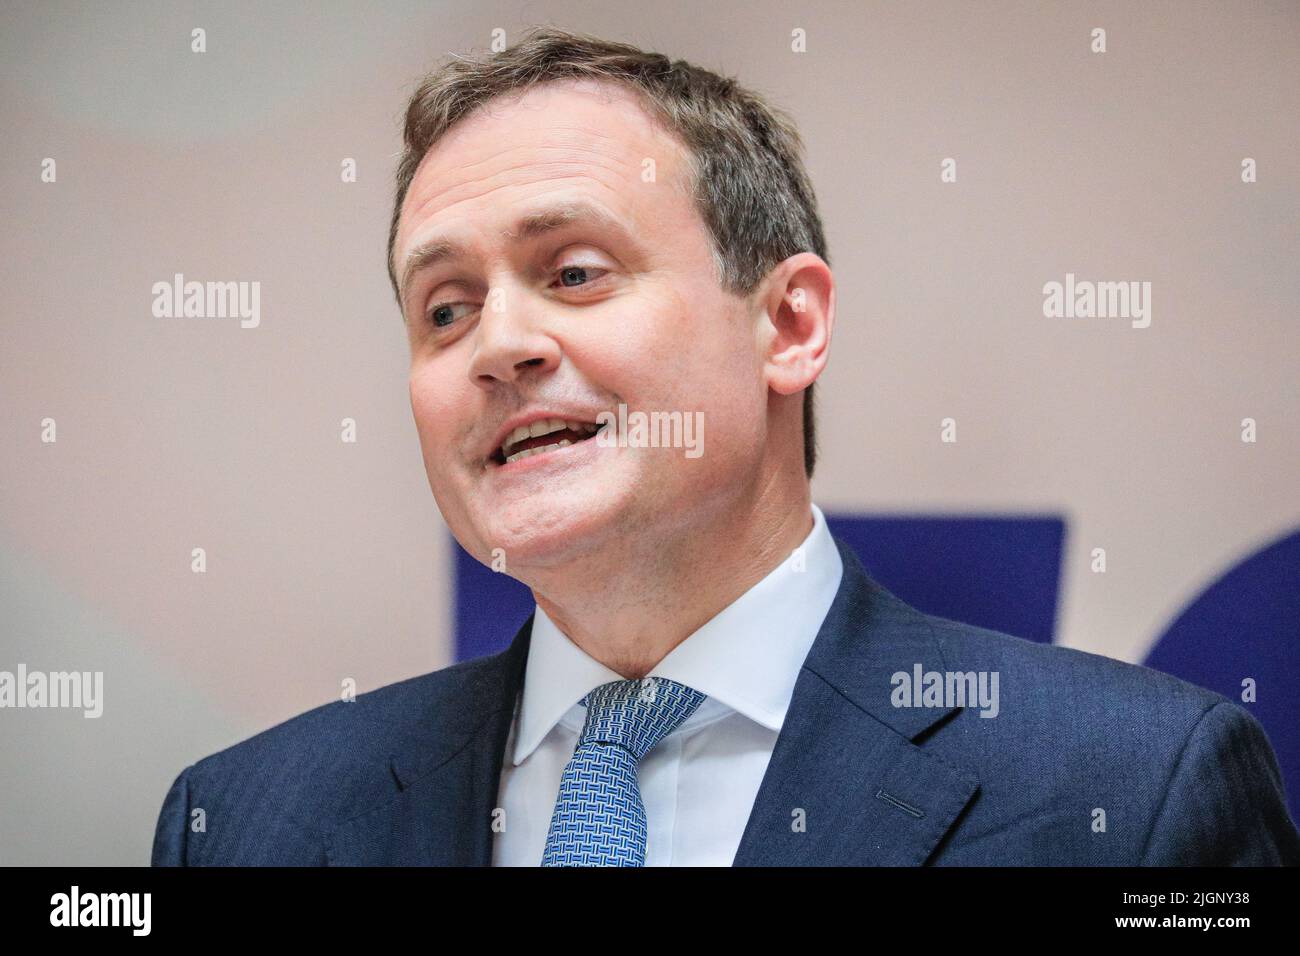 London, UK. 12th July, 2022. Tom Tugendhat, MP, chair of the Commons Foreign Affairs Select Committee, launches his campaign for the conservative Party leadership and to be the next Prime Minister of the UK at Millbank in London today. The MP for Tonbridge and Malling has the backing of Cabinet Minister Anne-Marie Trevelyan, MPs Caroline Nokes, Damian Green, and currently around 21 public backers in total. Credit: Imageplotter/Alamy Live News Stock Photo